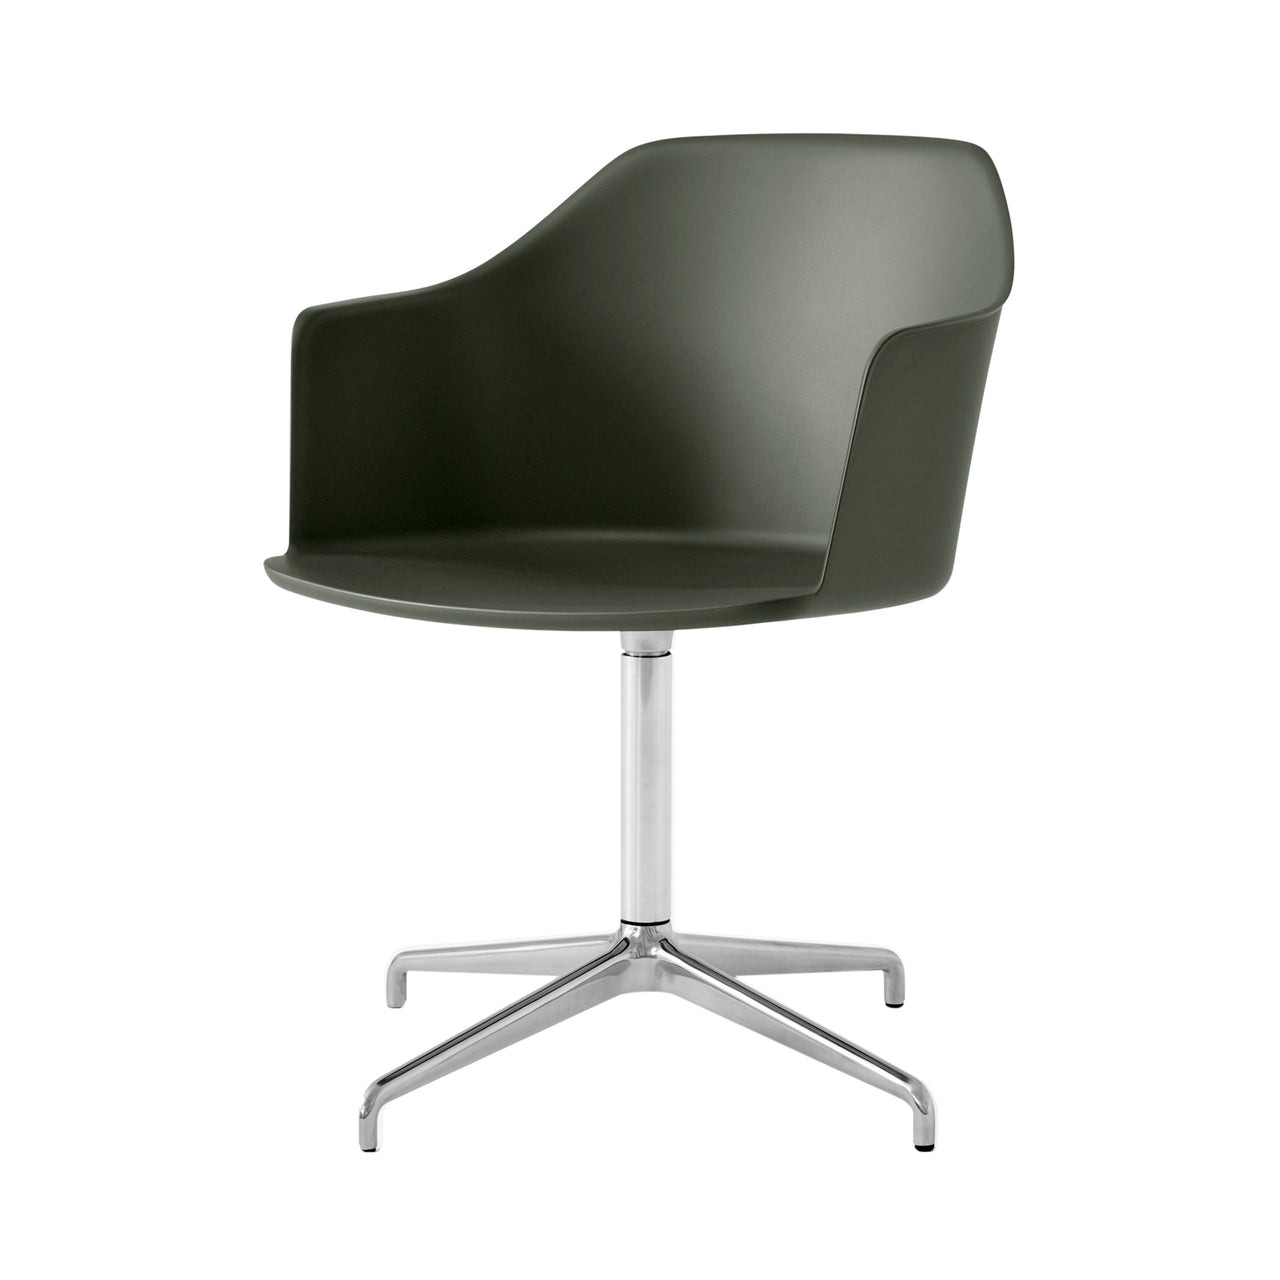 Rely Armchair HW43: Bronze Green + Polished Aluminum